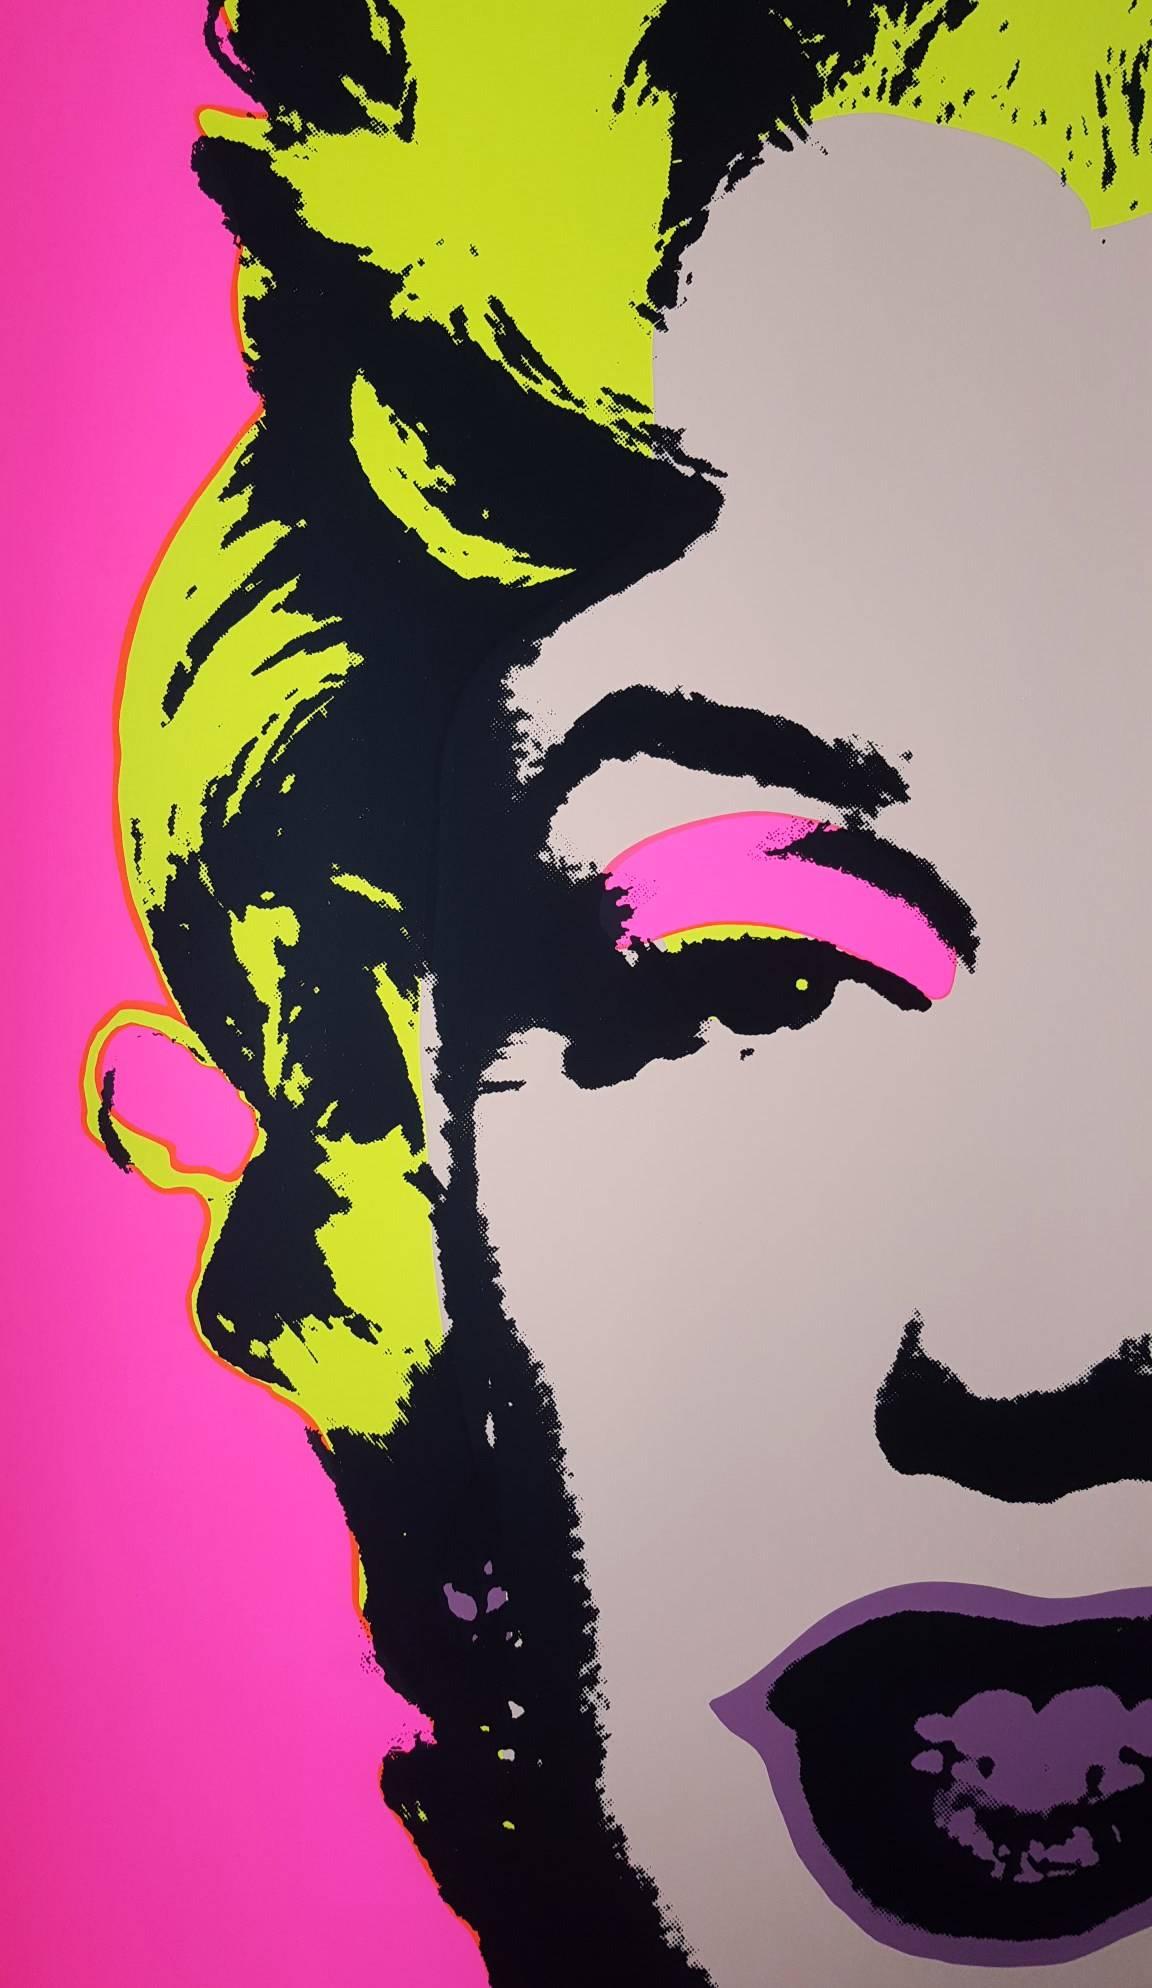 An original screen print on museum board by Sunday B. Morning in the style of American artist Andy Warhol (1928-1987) titled 